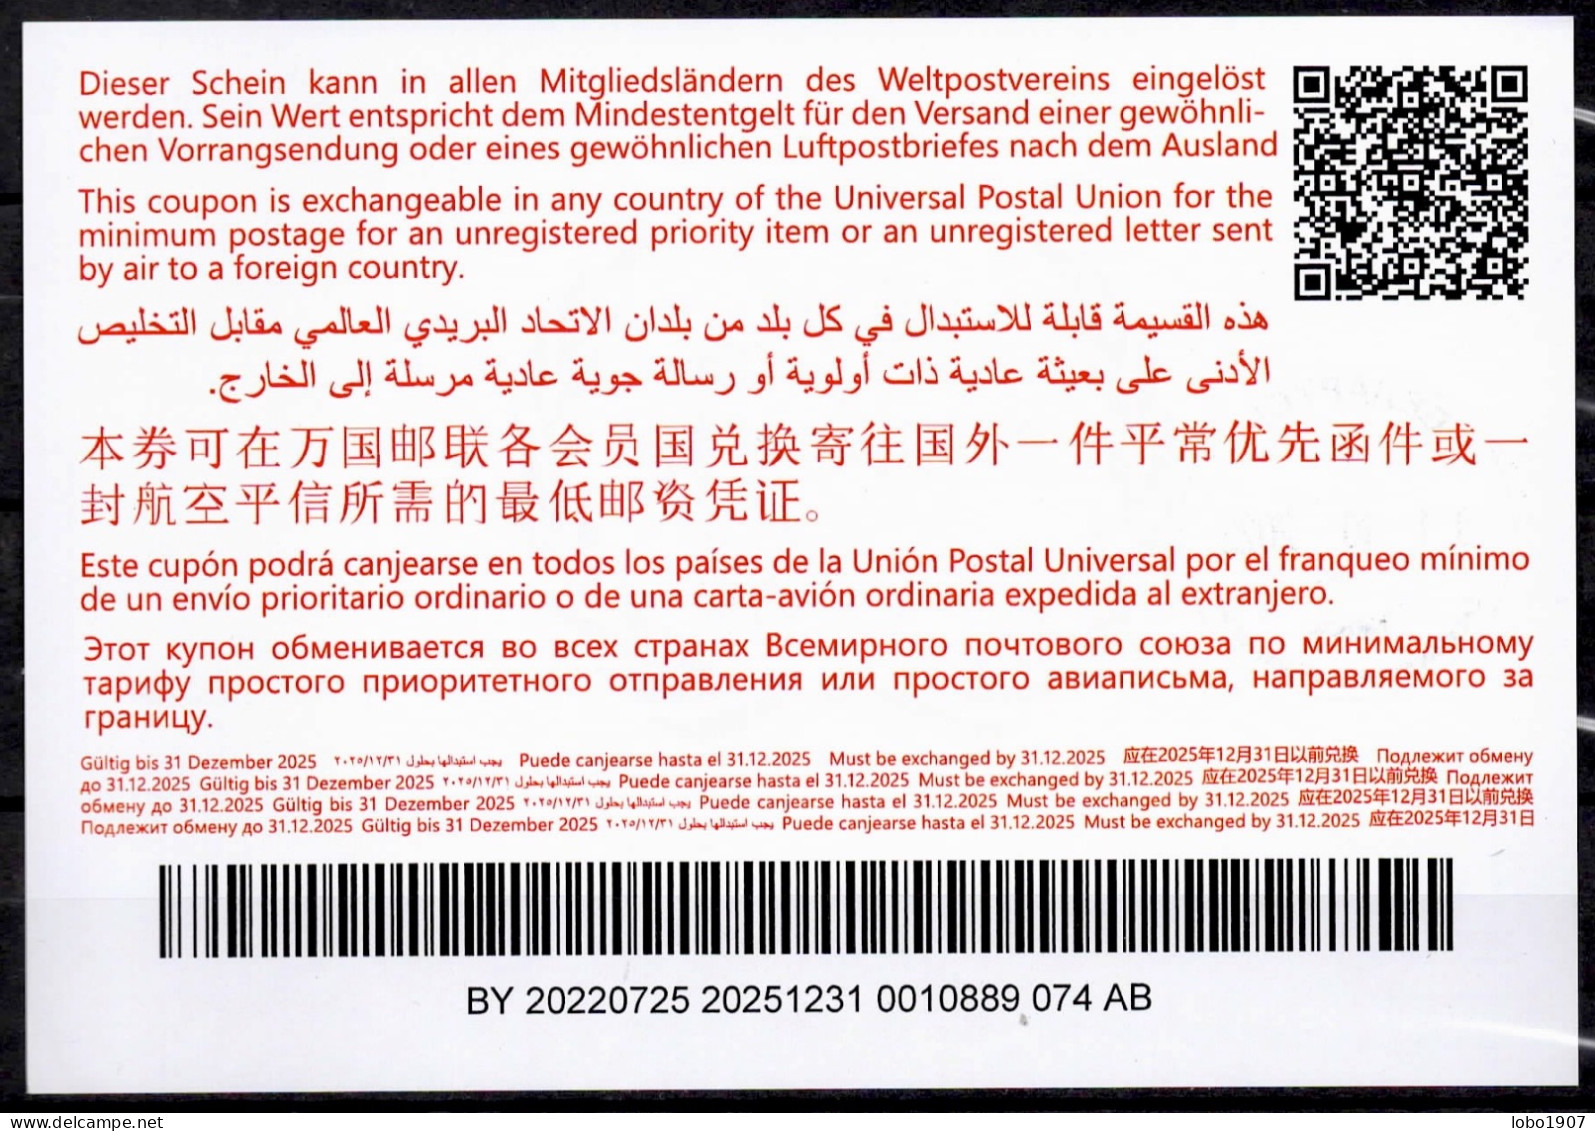 BELARUS  Abidjan Special Issue Ab49  20220725 AB  Int. Reply Coupon Reponse Antwortschein IRC IAS  MINSK 01.10.2022  FD! - Wit-Rusland